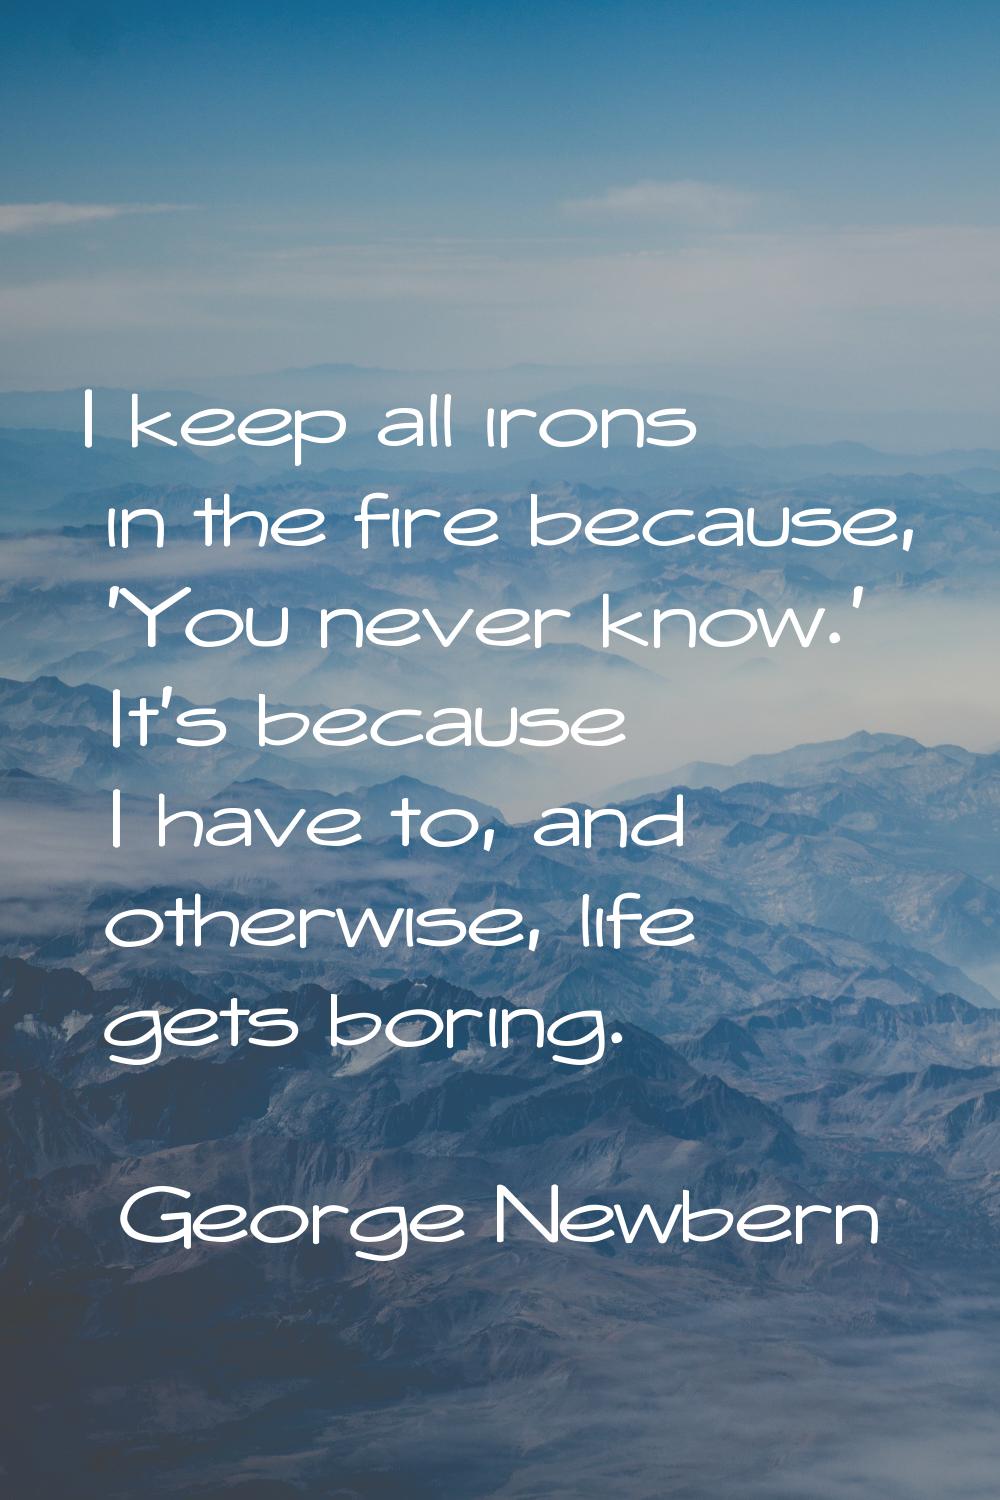 I keep all irons in the fire because, 'You never know.' It's because I have to, and otherwise, life